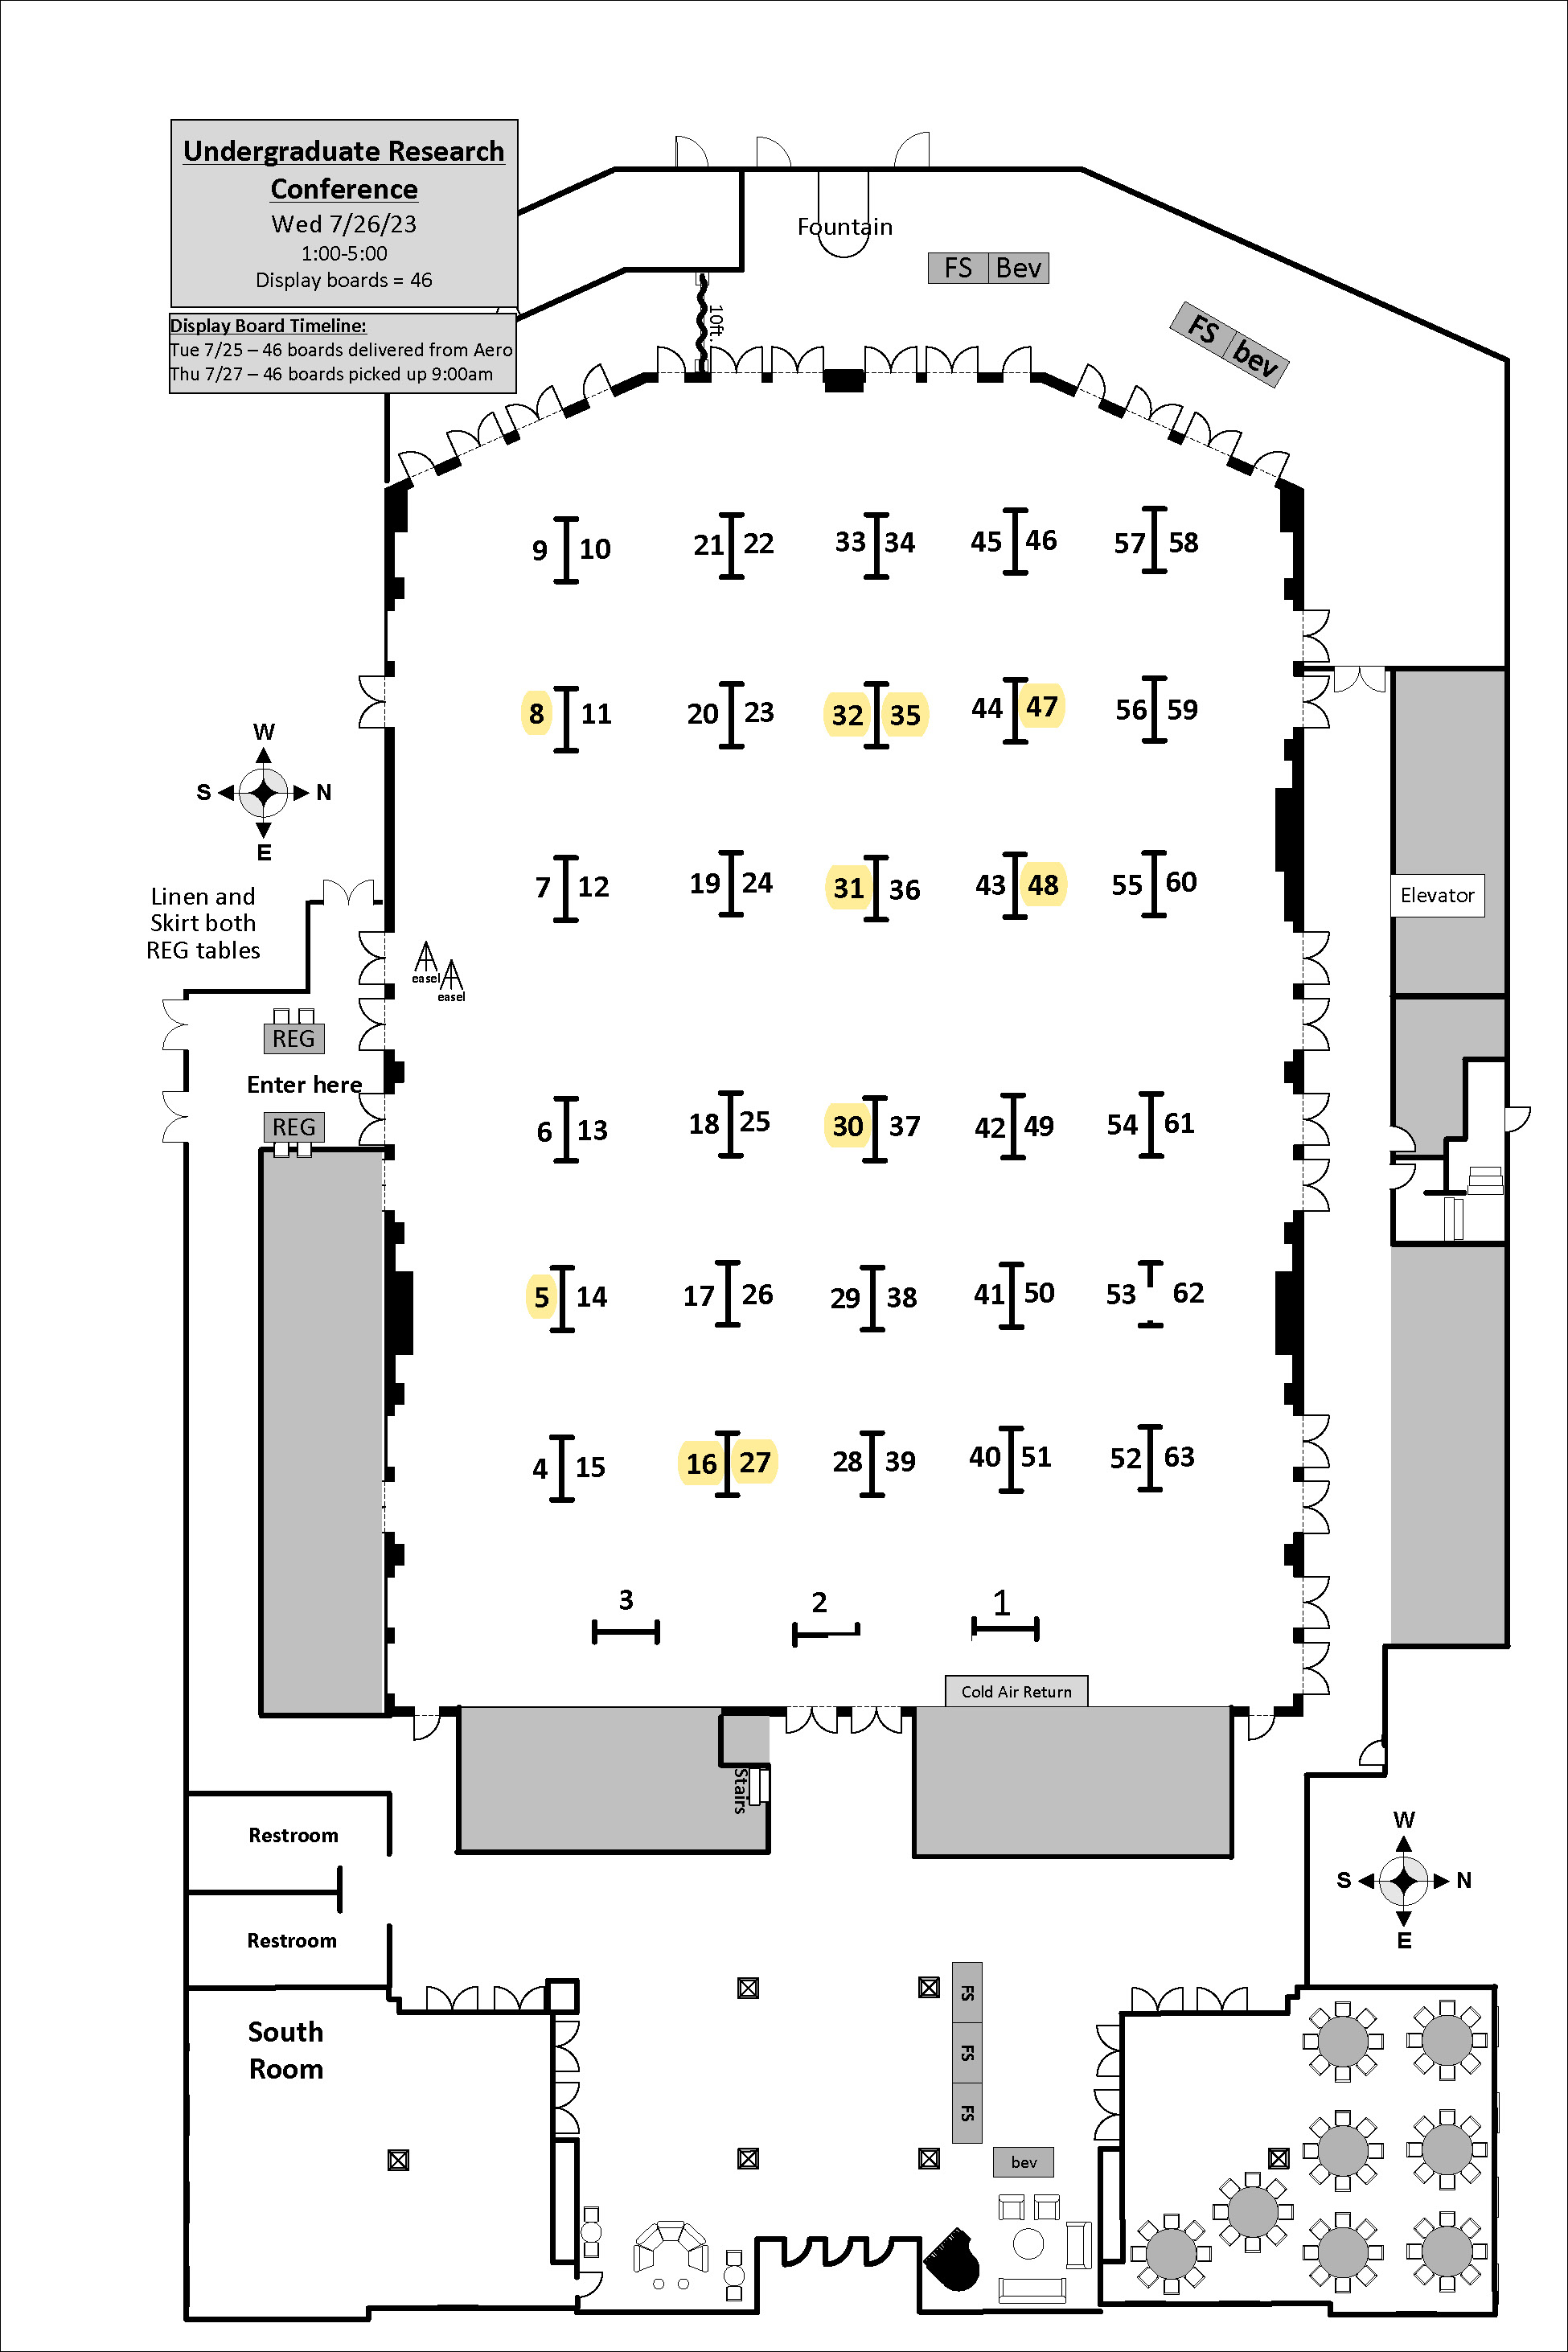 Undergraduate Research Conference Venue/Poster Layout